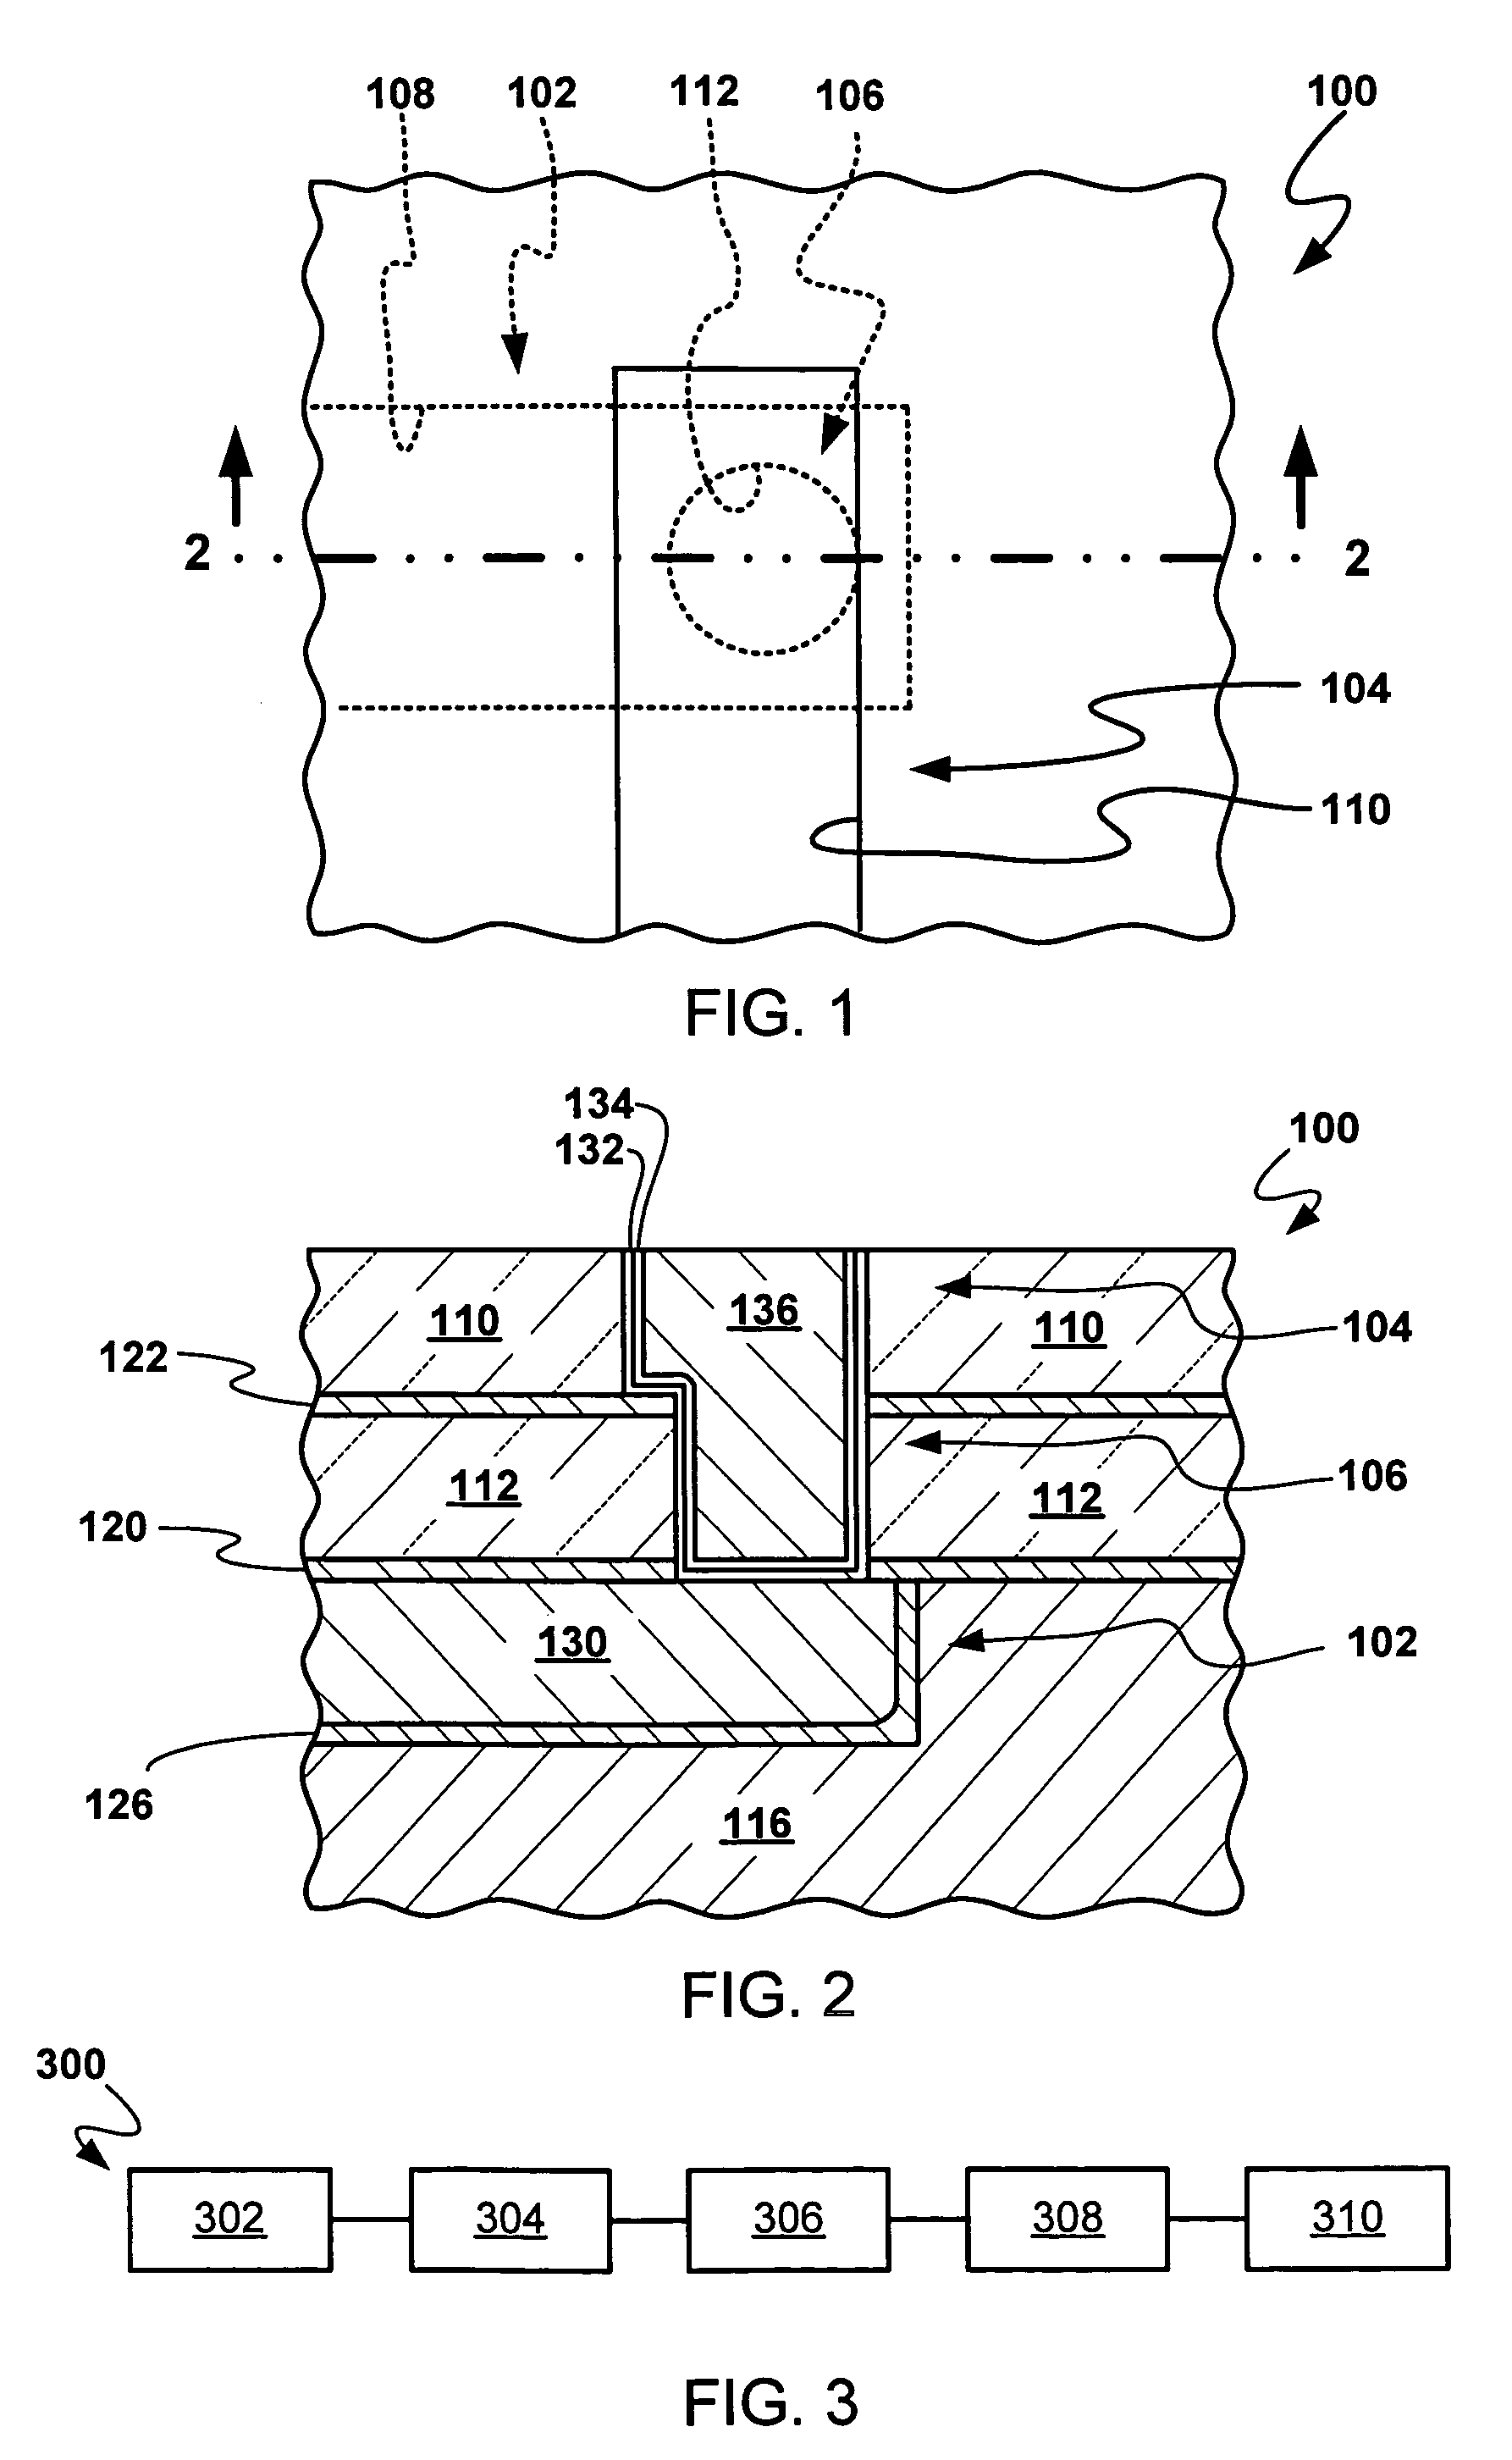 Nano-electrode-array for integrated circuit interconnects